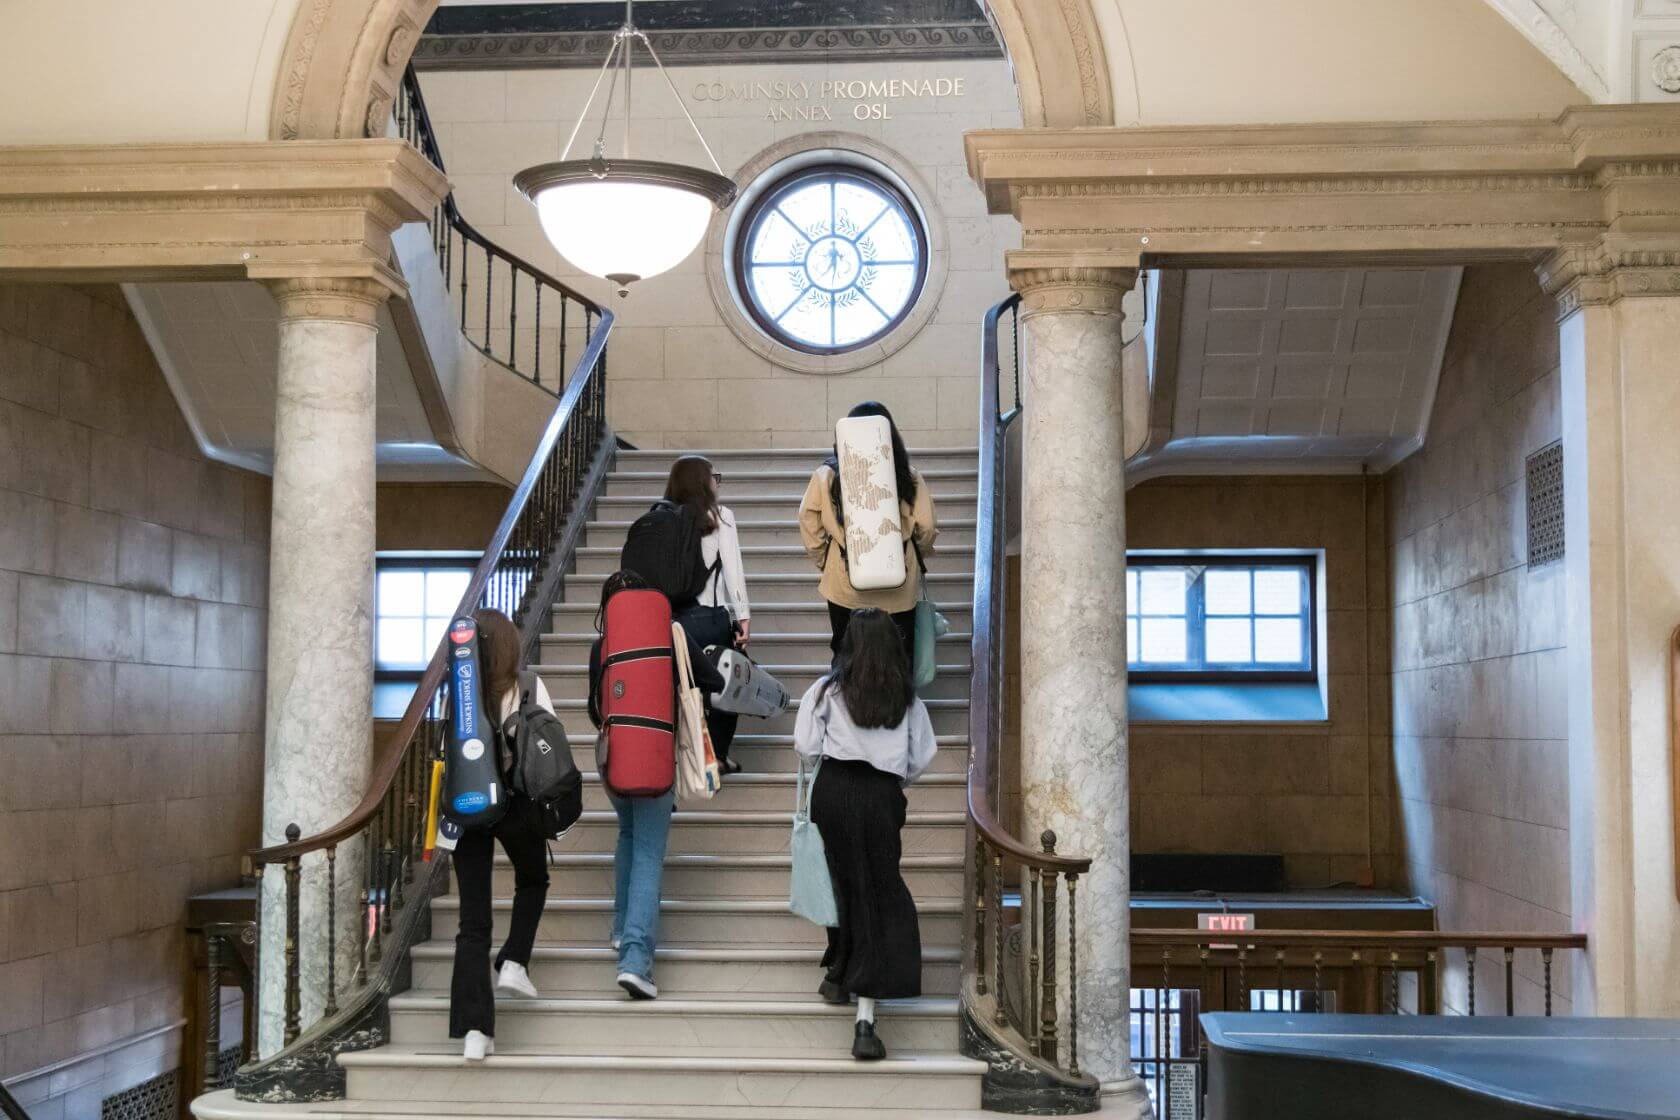 A group of students make their way up a staircase on their way to class at the University of Rochester, Eastman School of Music.